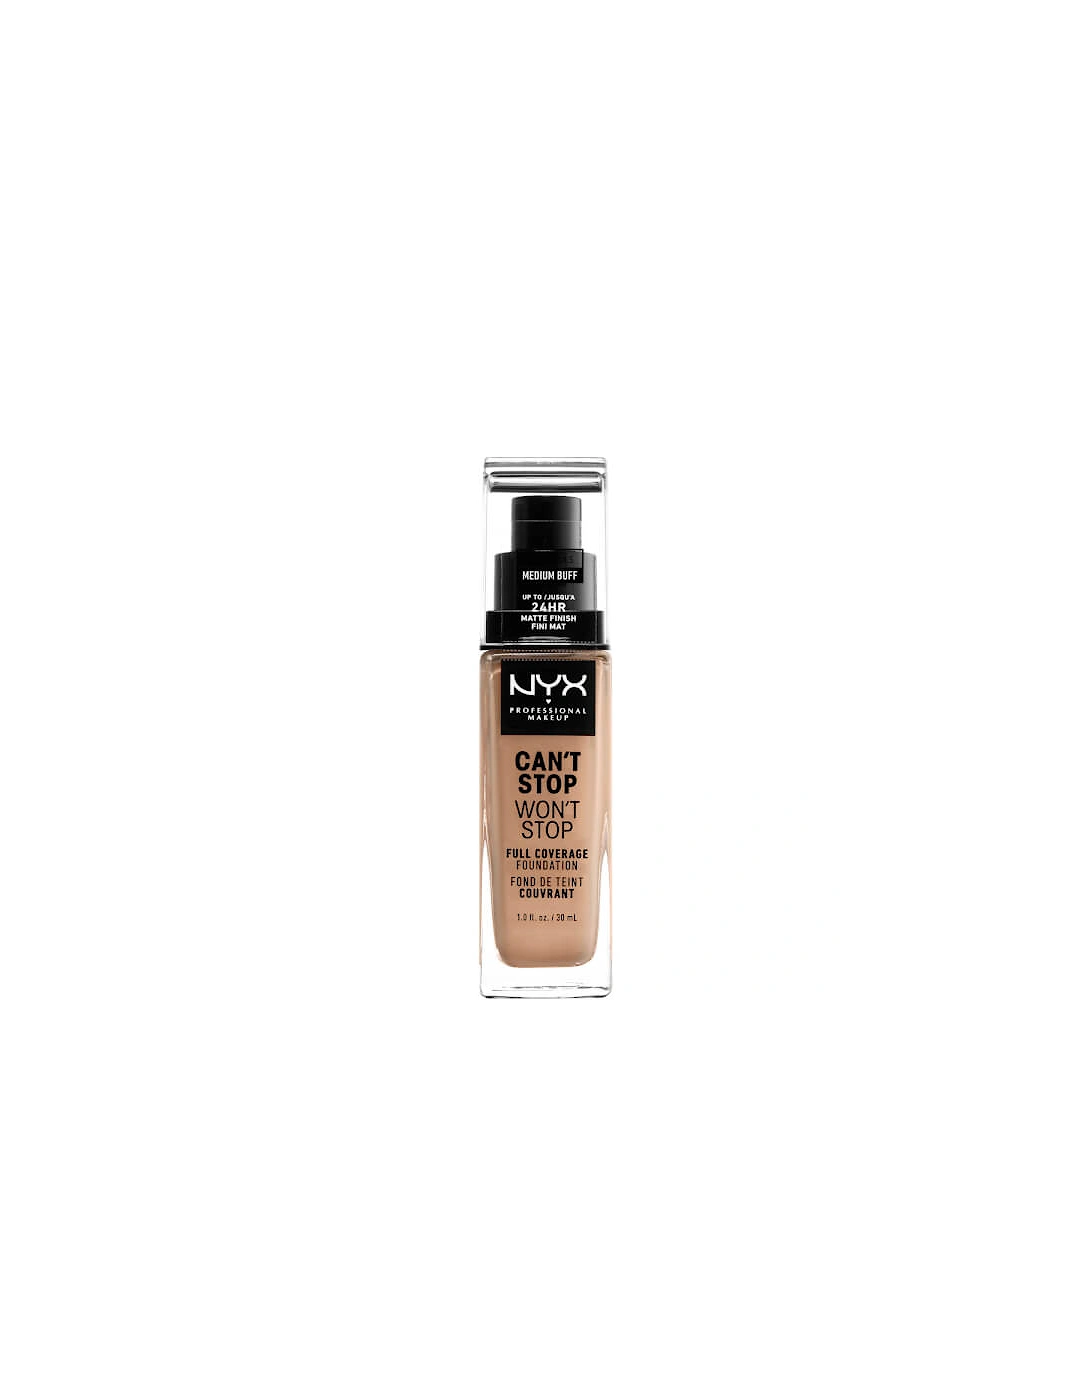 Can't Stop Won't Stop 24 Hour Foundation - Medium Buff, 2 of 1